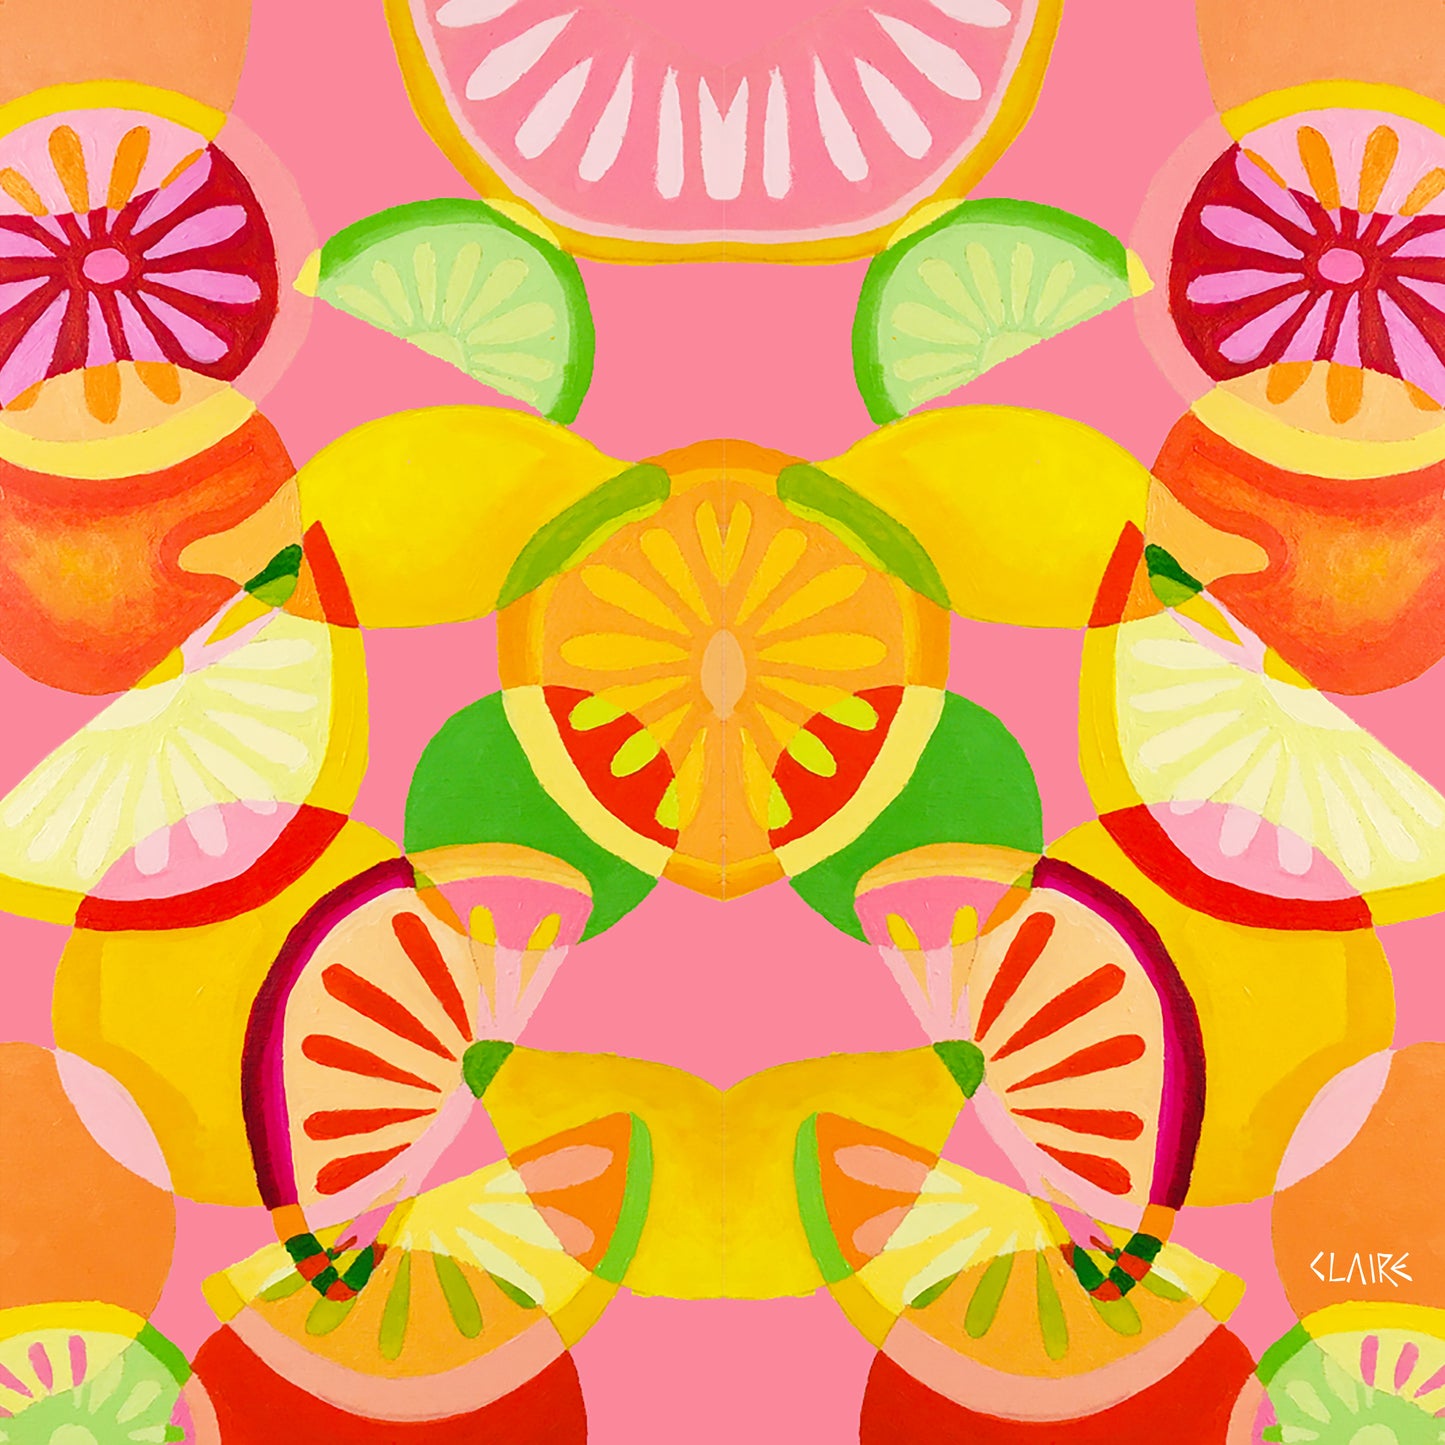 Juicy (Prints Available)